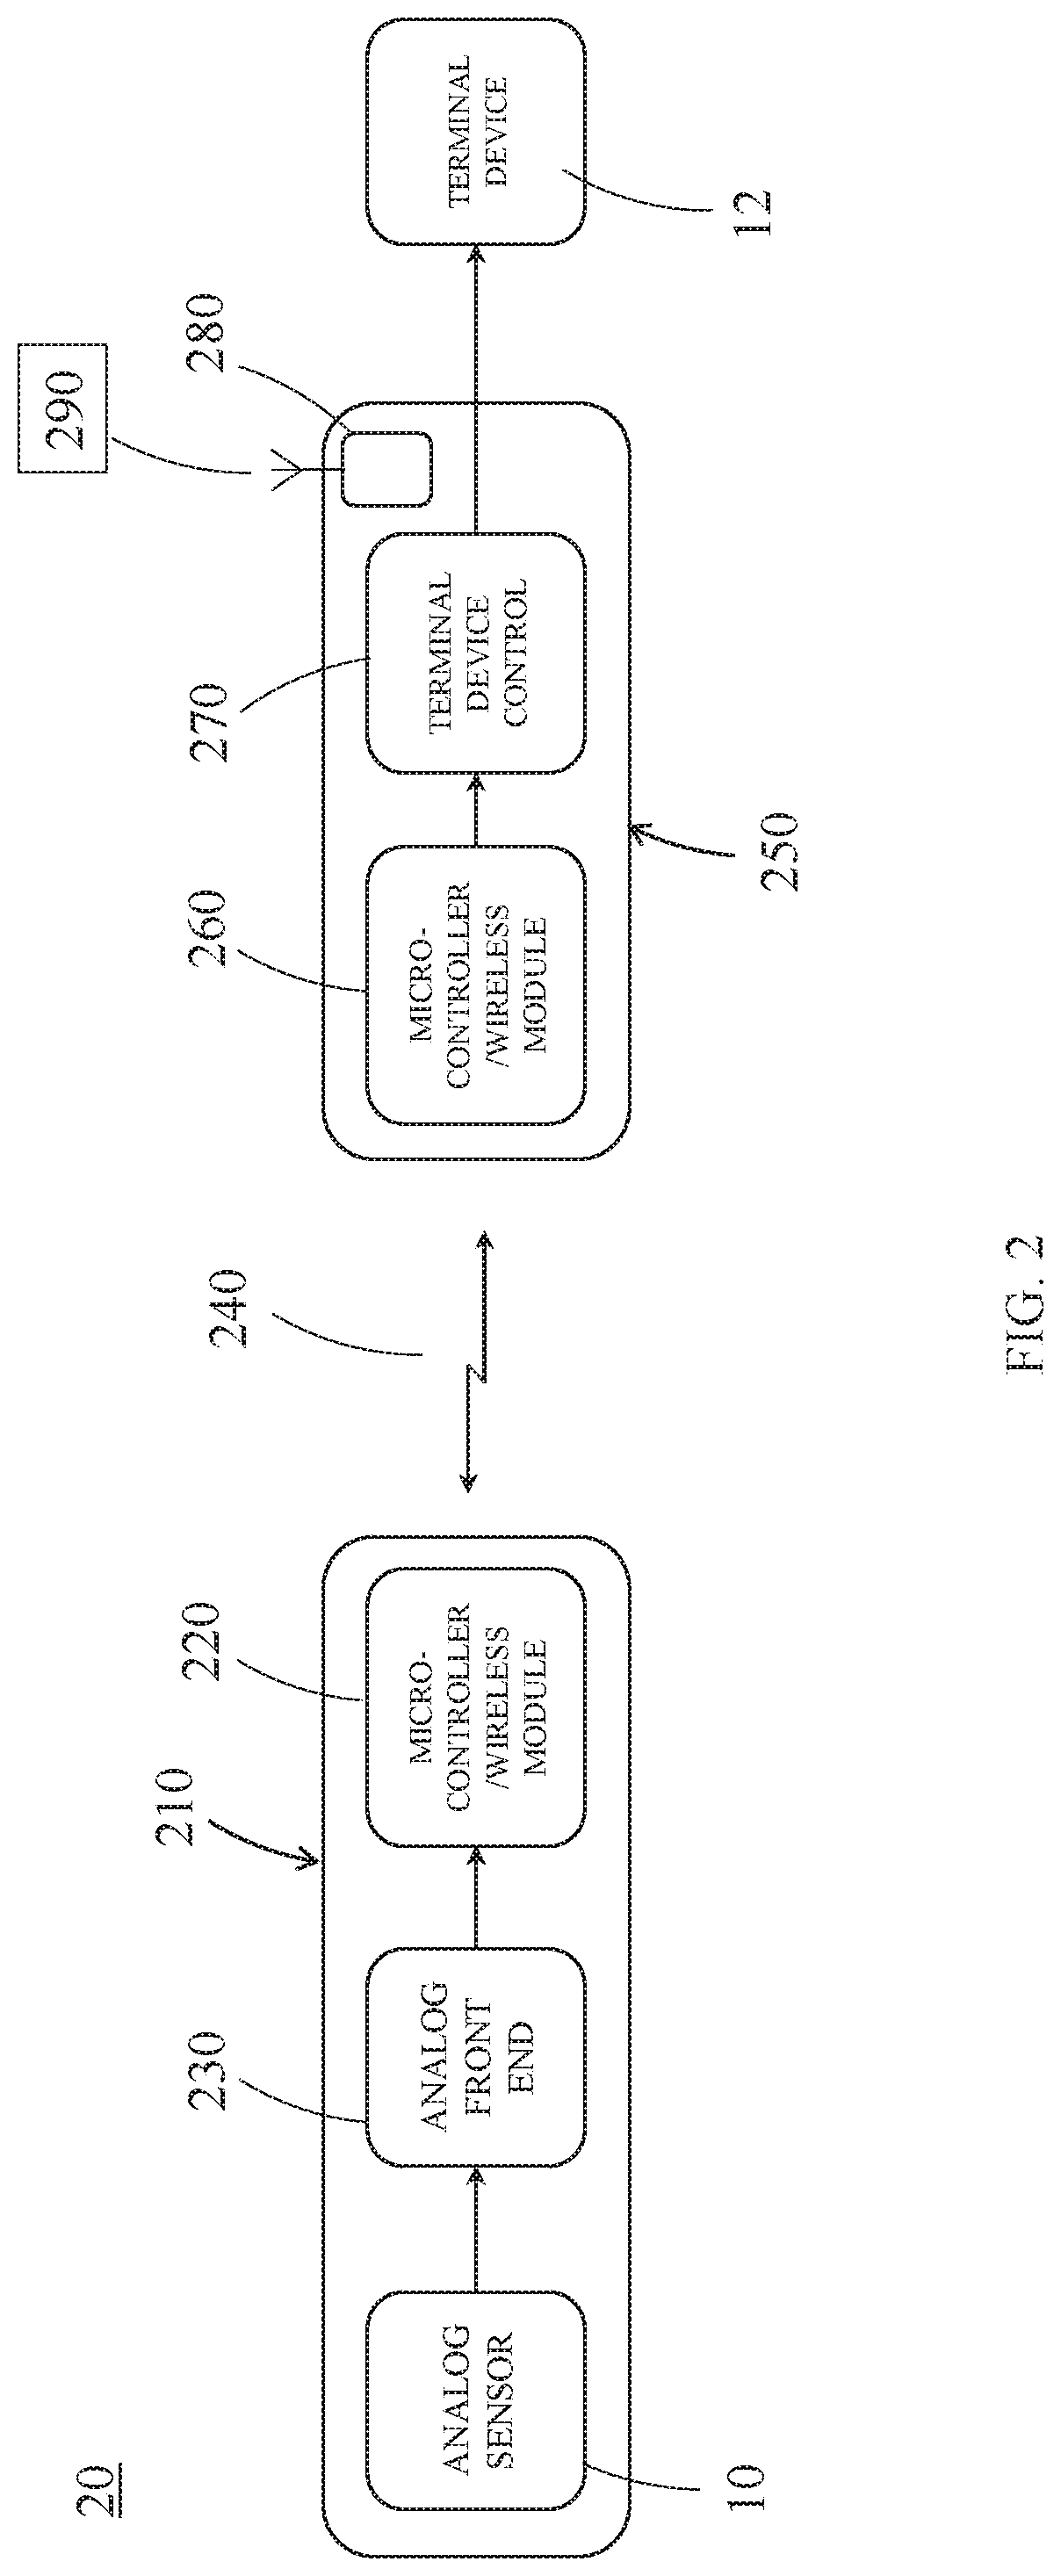 Management of wireless transmission rate of control signals for power assistive devices